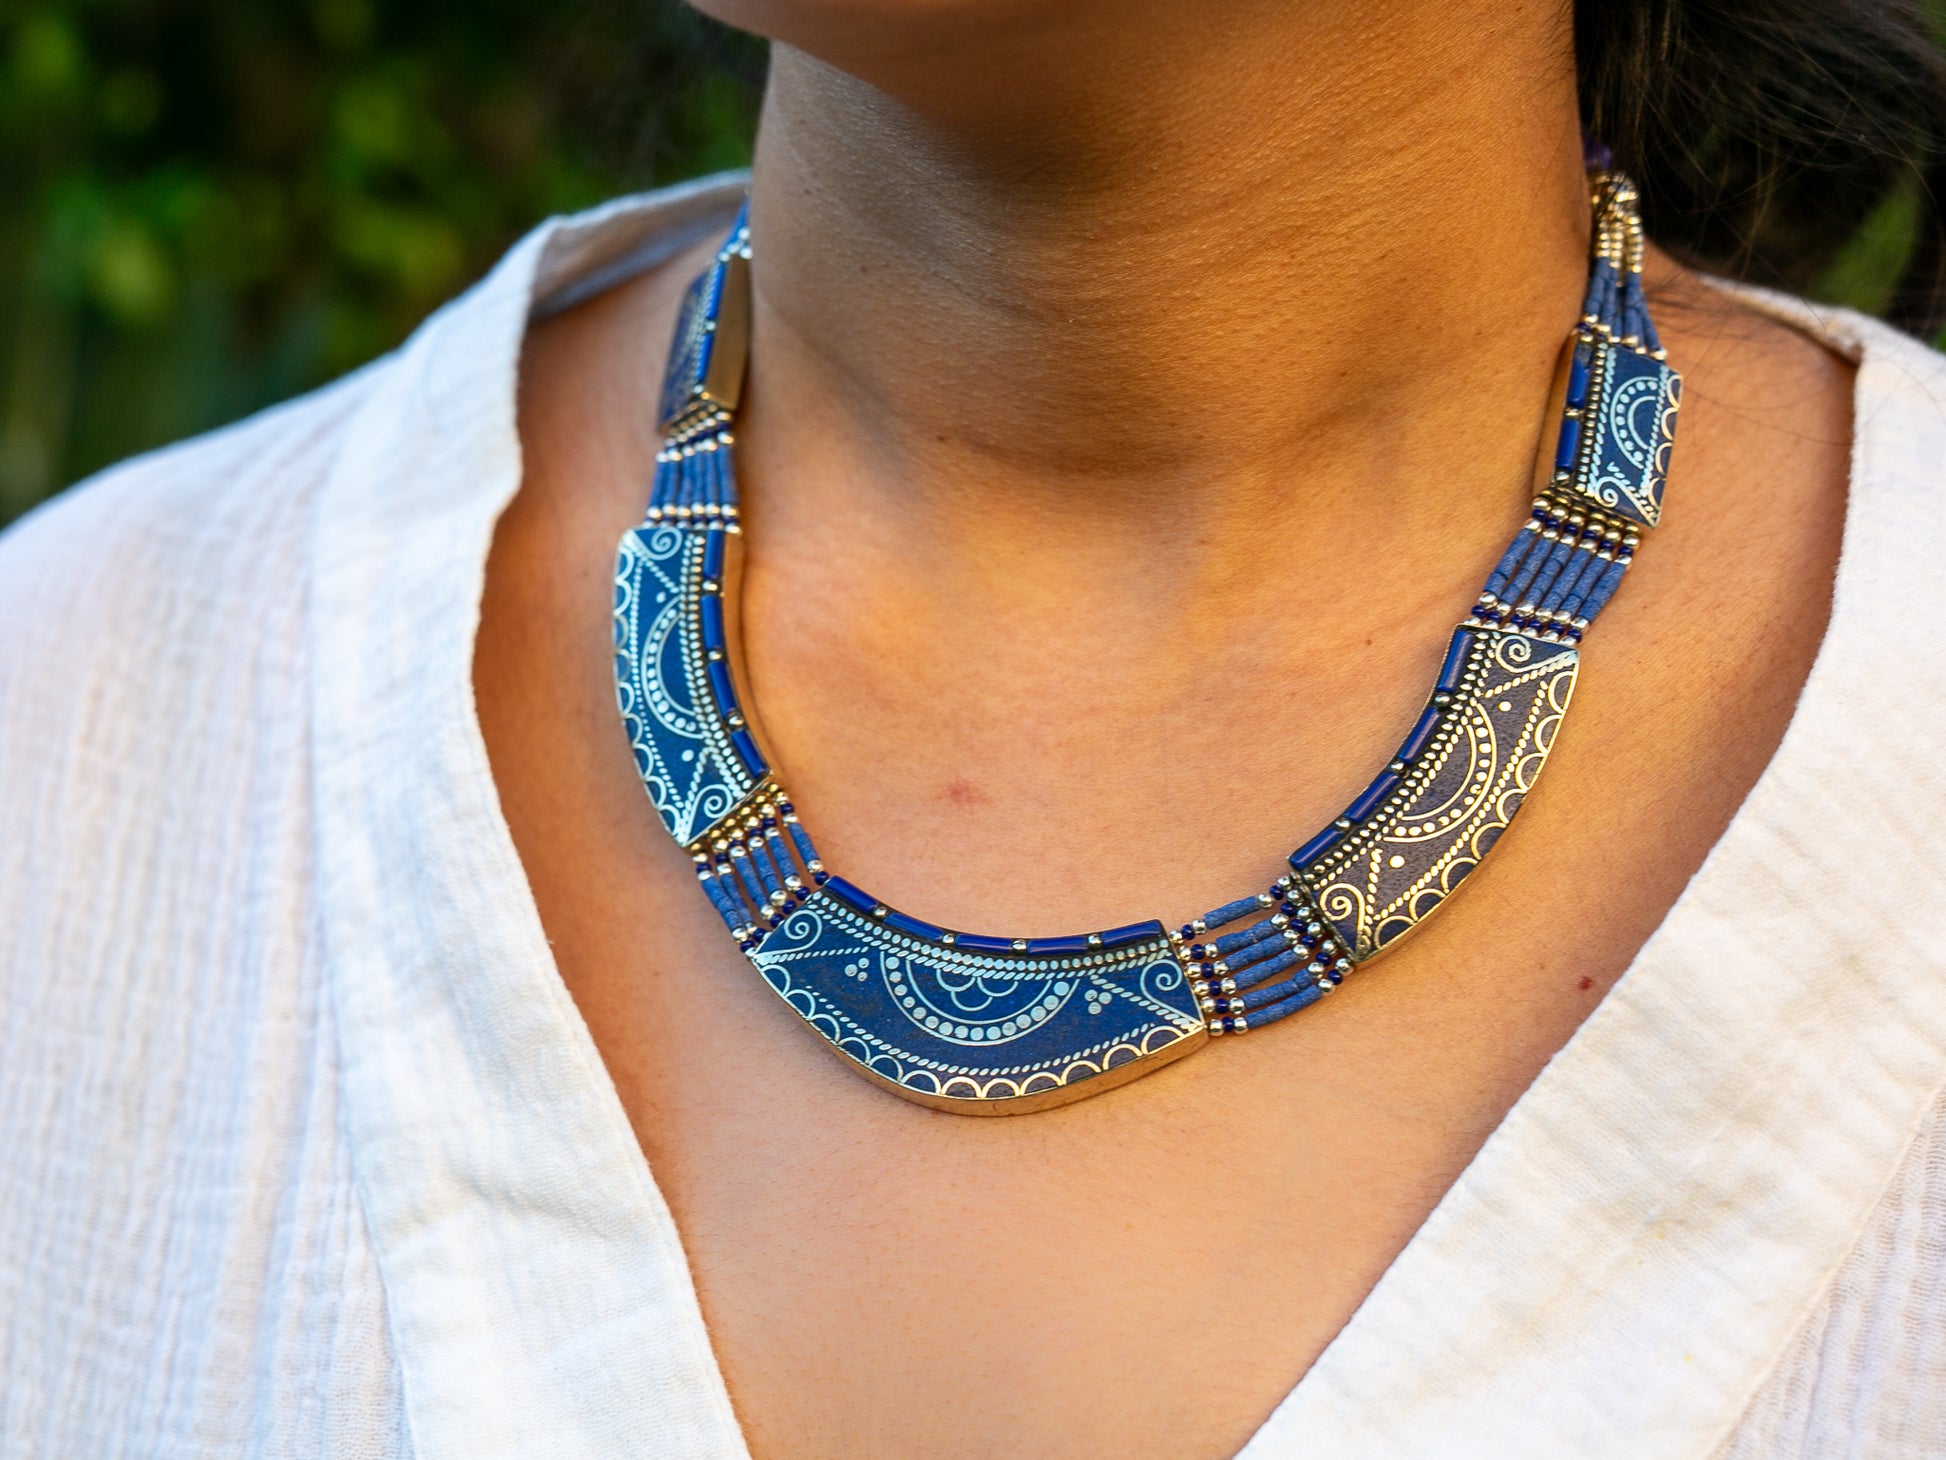 Another image of Tibetan lapis necklace